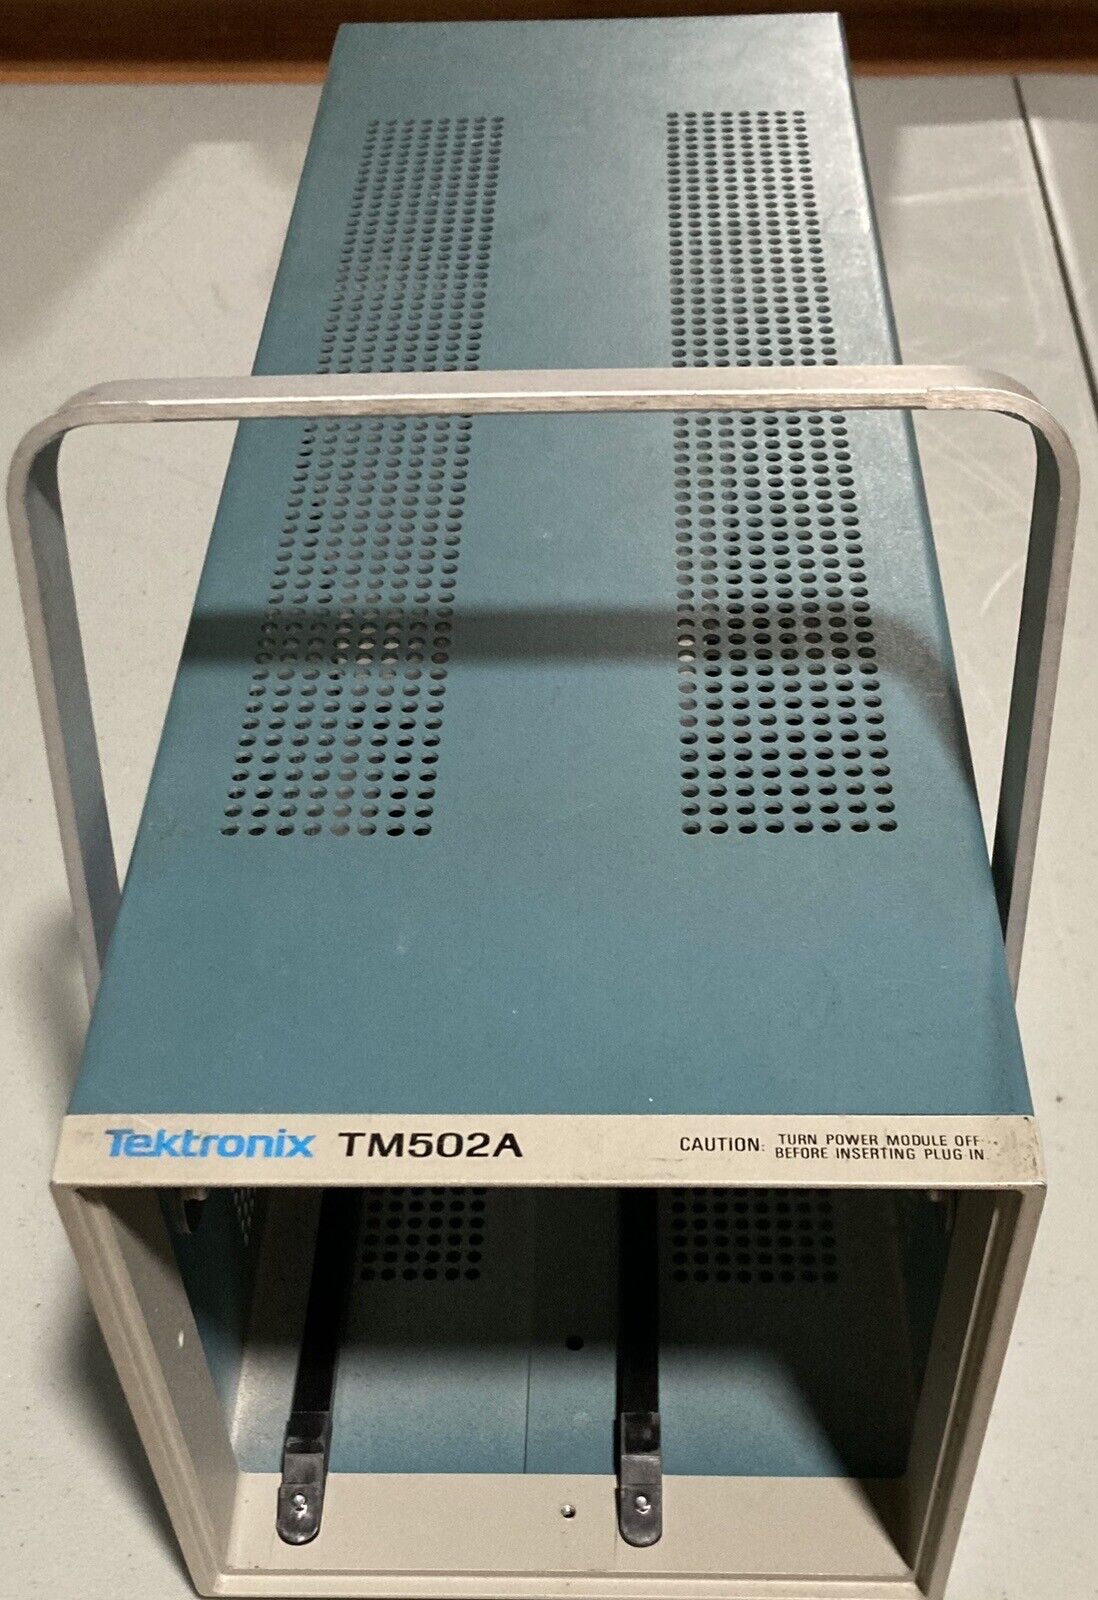 Tektronix TM502A Two Slot Mainframe - Tested and Working